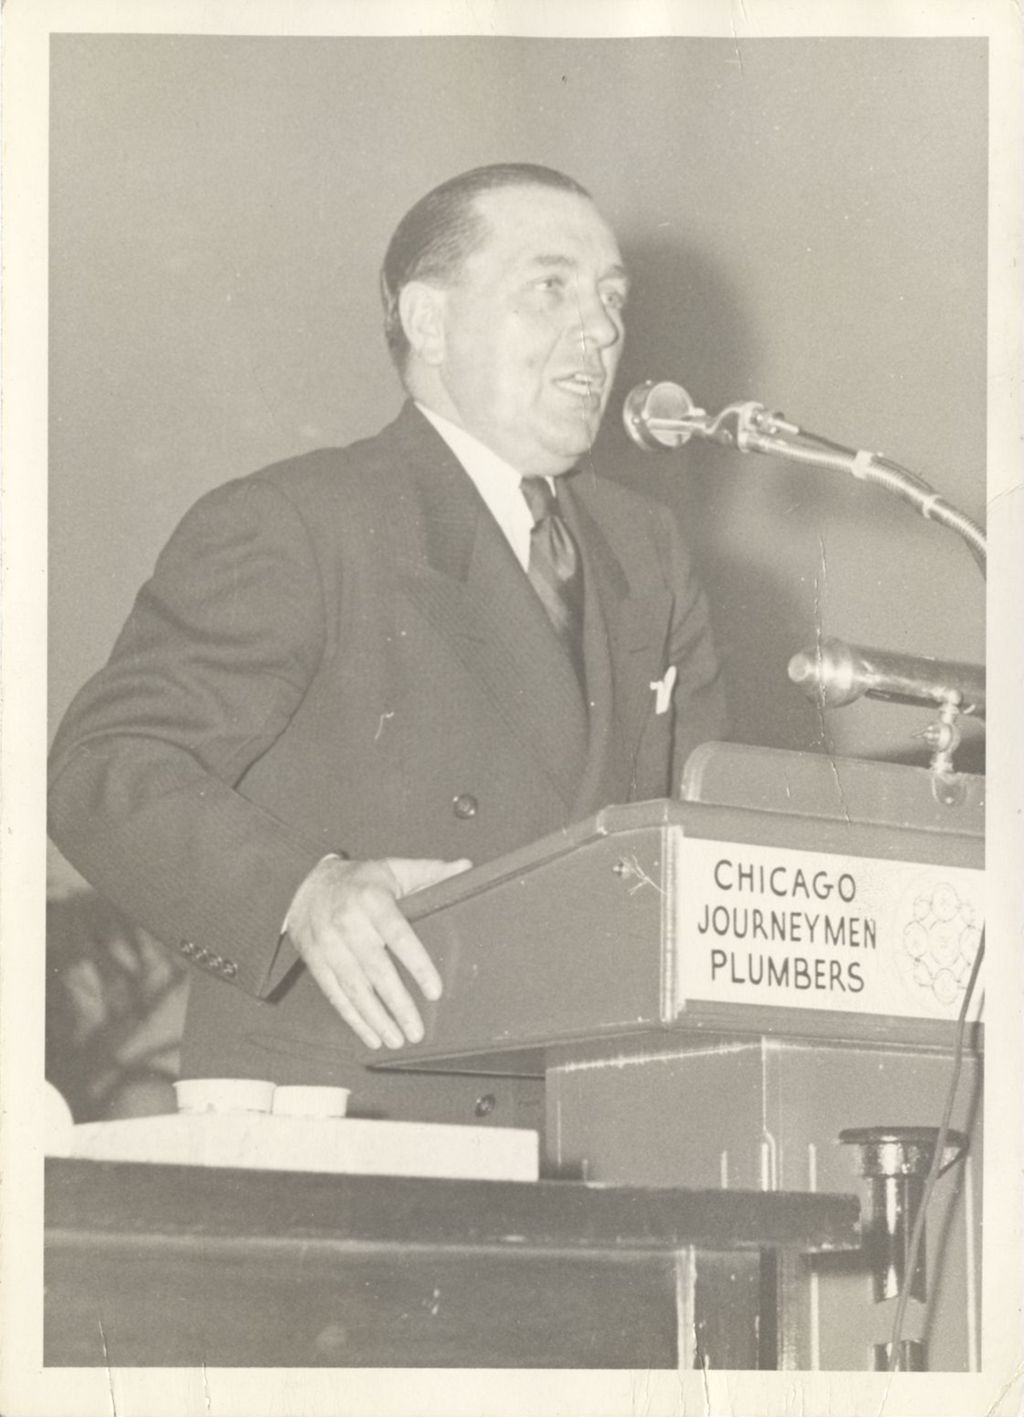 Miniature of Richard J. Daley speaking to the Chicago Journeymen Plumbers Union